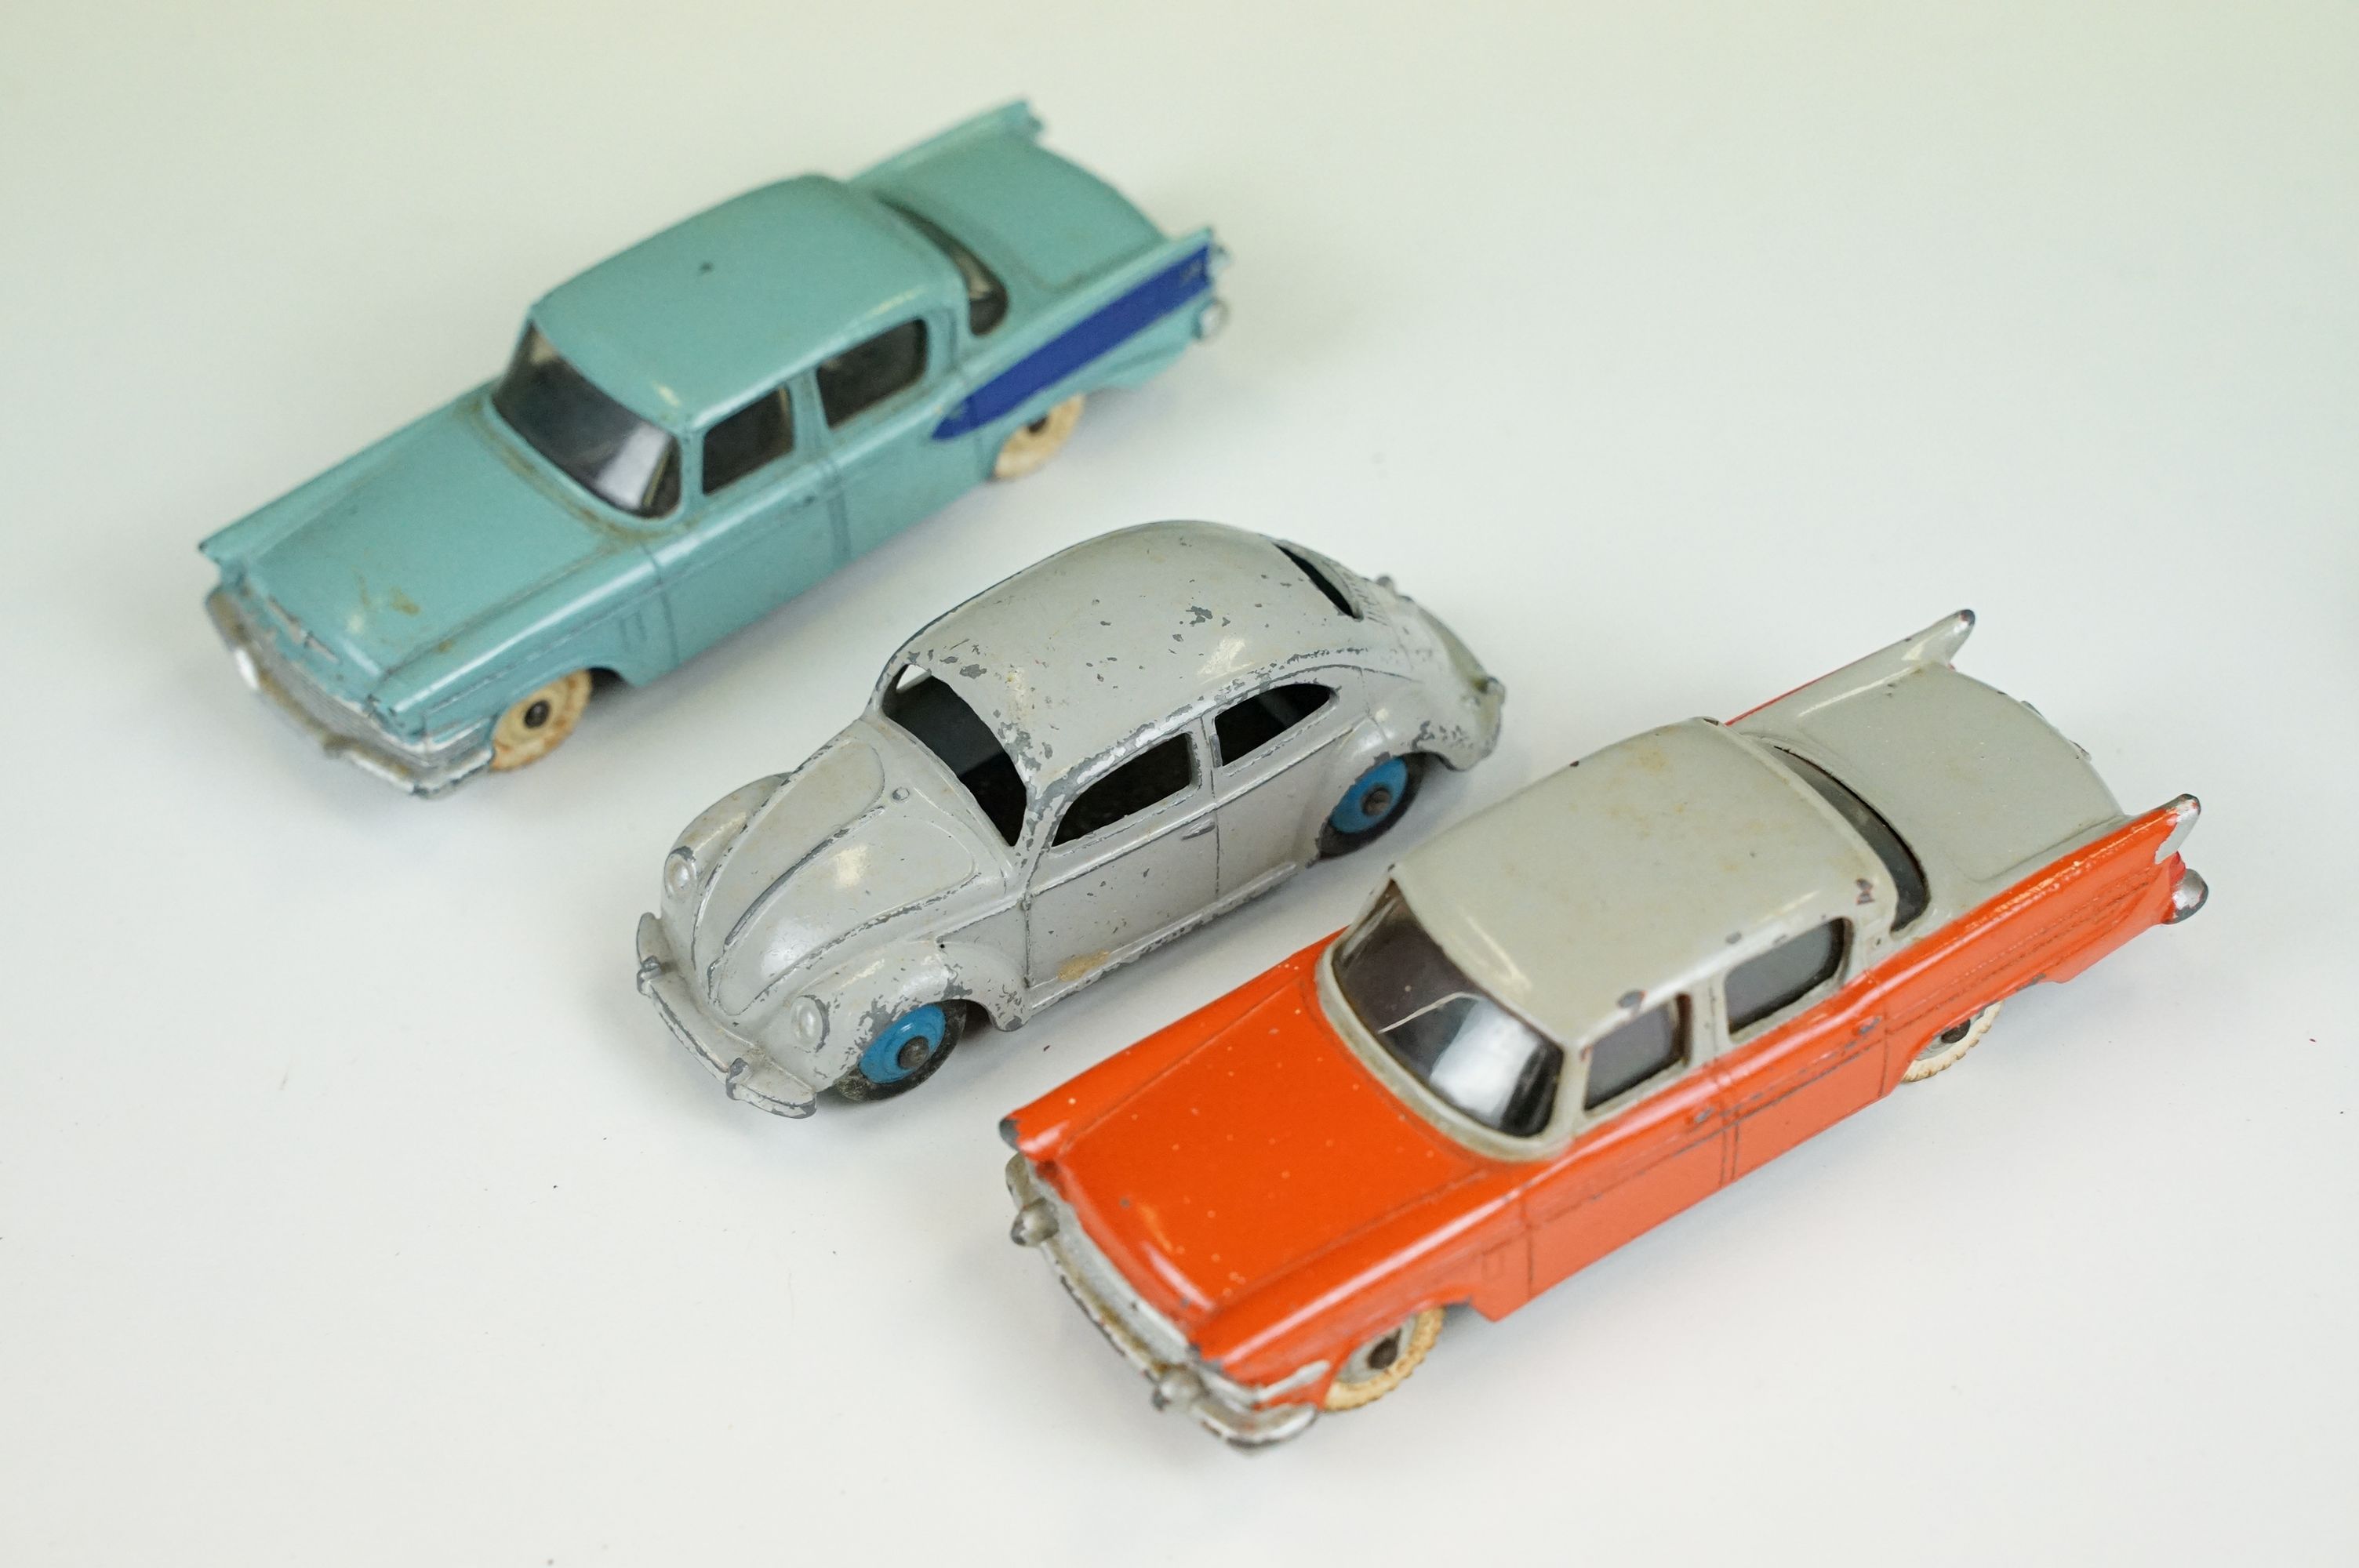 35 Mid 20th C play worn diecast models to include Dinky, Triang & Corgi examples, featuring Triang - Image 7 of 13